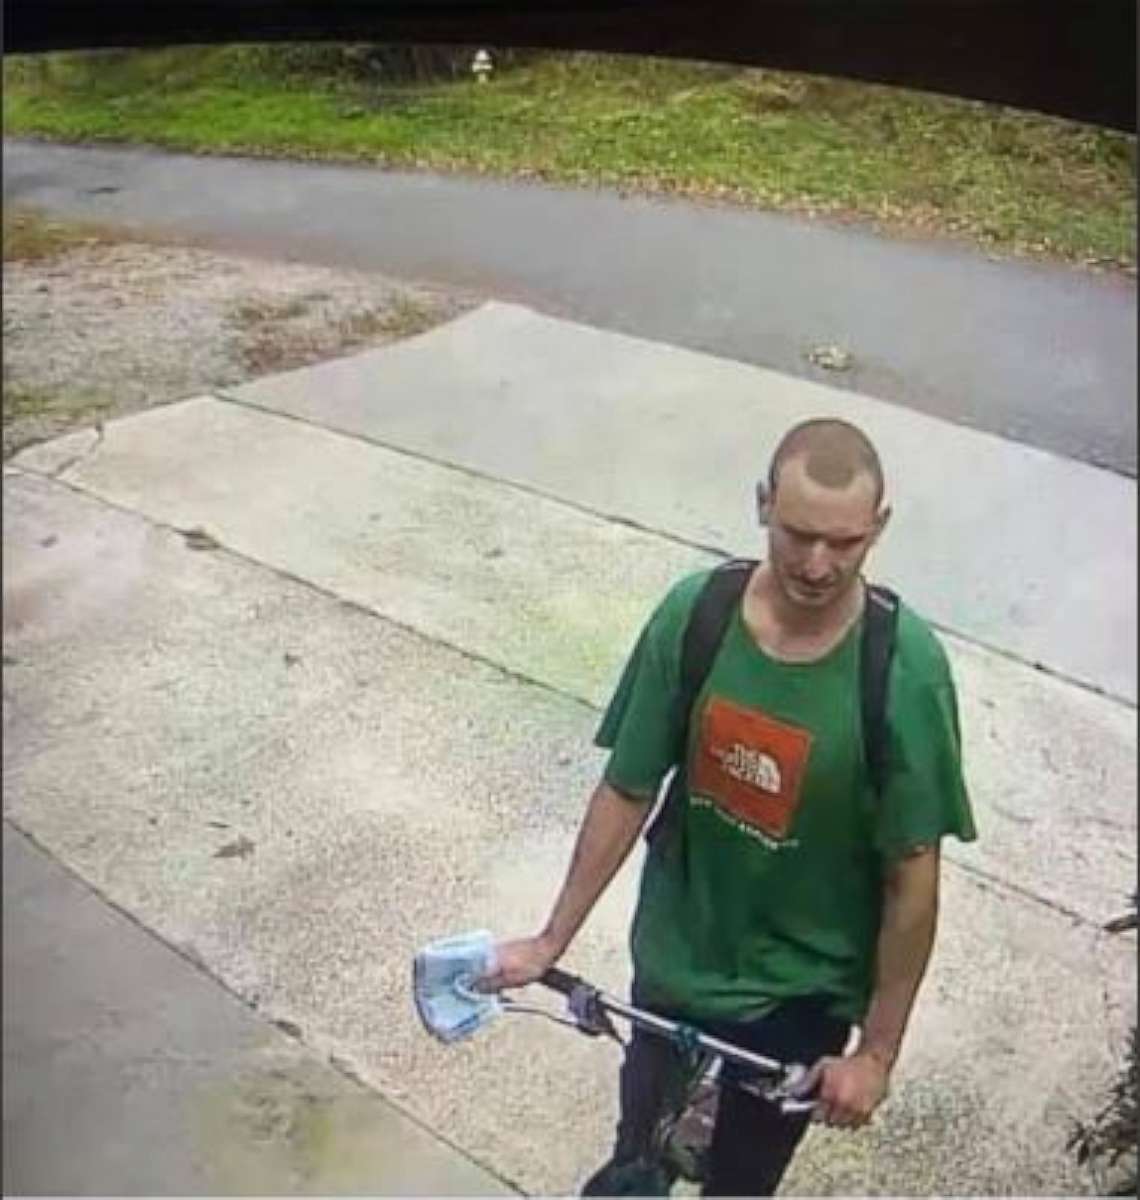 PHOTO: An accused porch pirate has been arrested after wearing the exact same shirt the very next day to a South Carolina courtroom that he had worn to steal packages from peoples’ porches, according to the Goose Creek Police Department on Nov. 13, 2020.